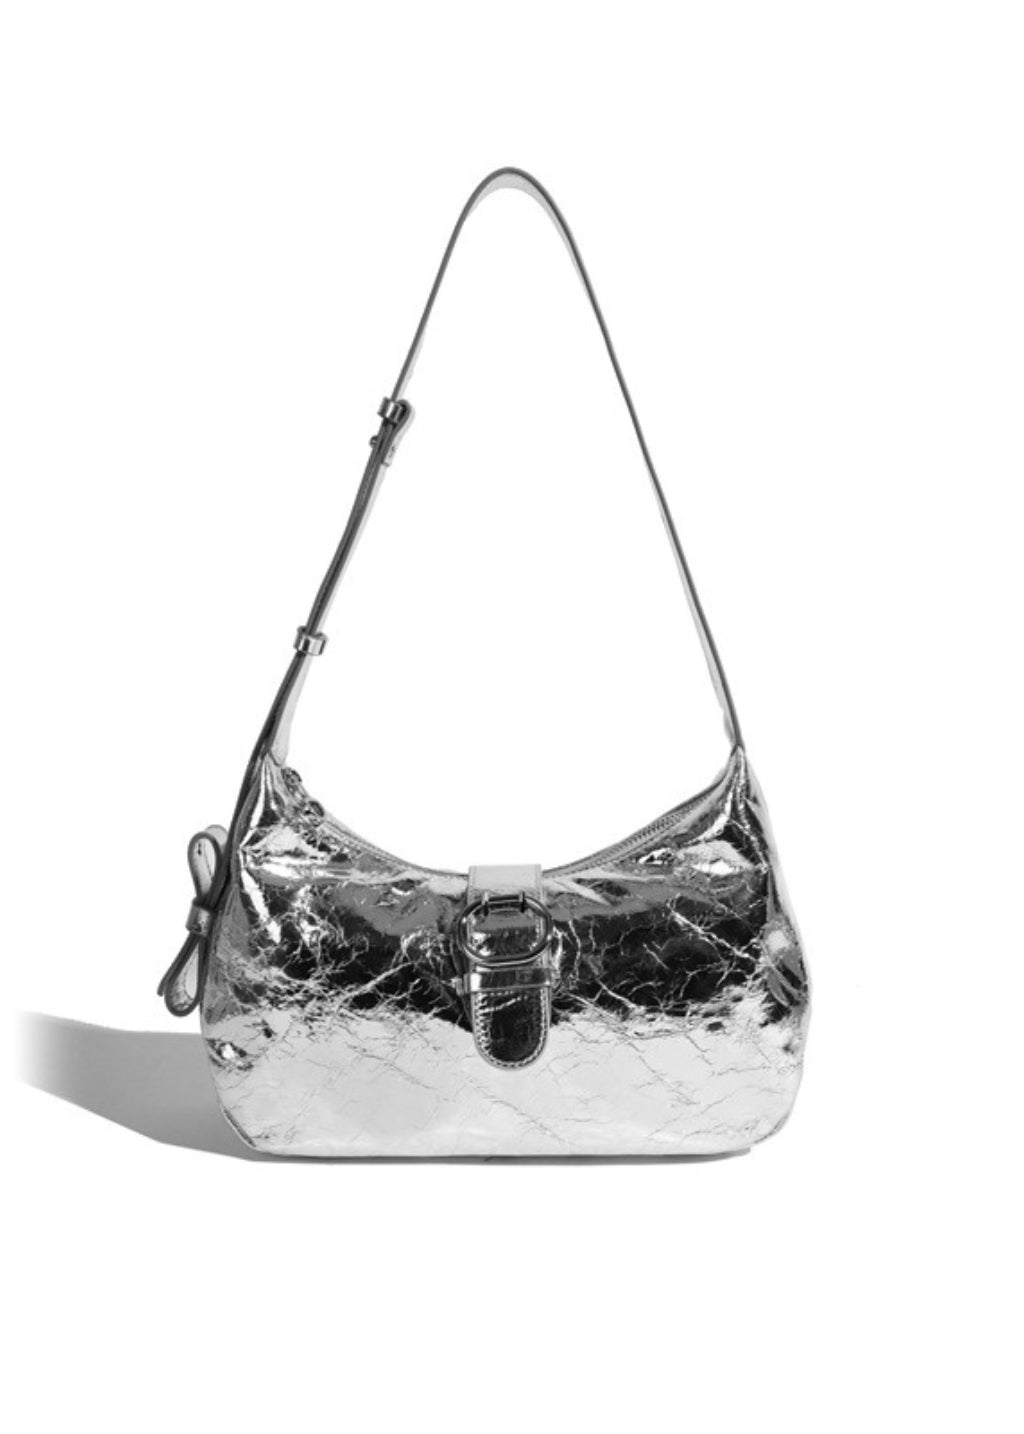 Stylish Medium Hobo Bag with Chic Buckle Accent